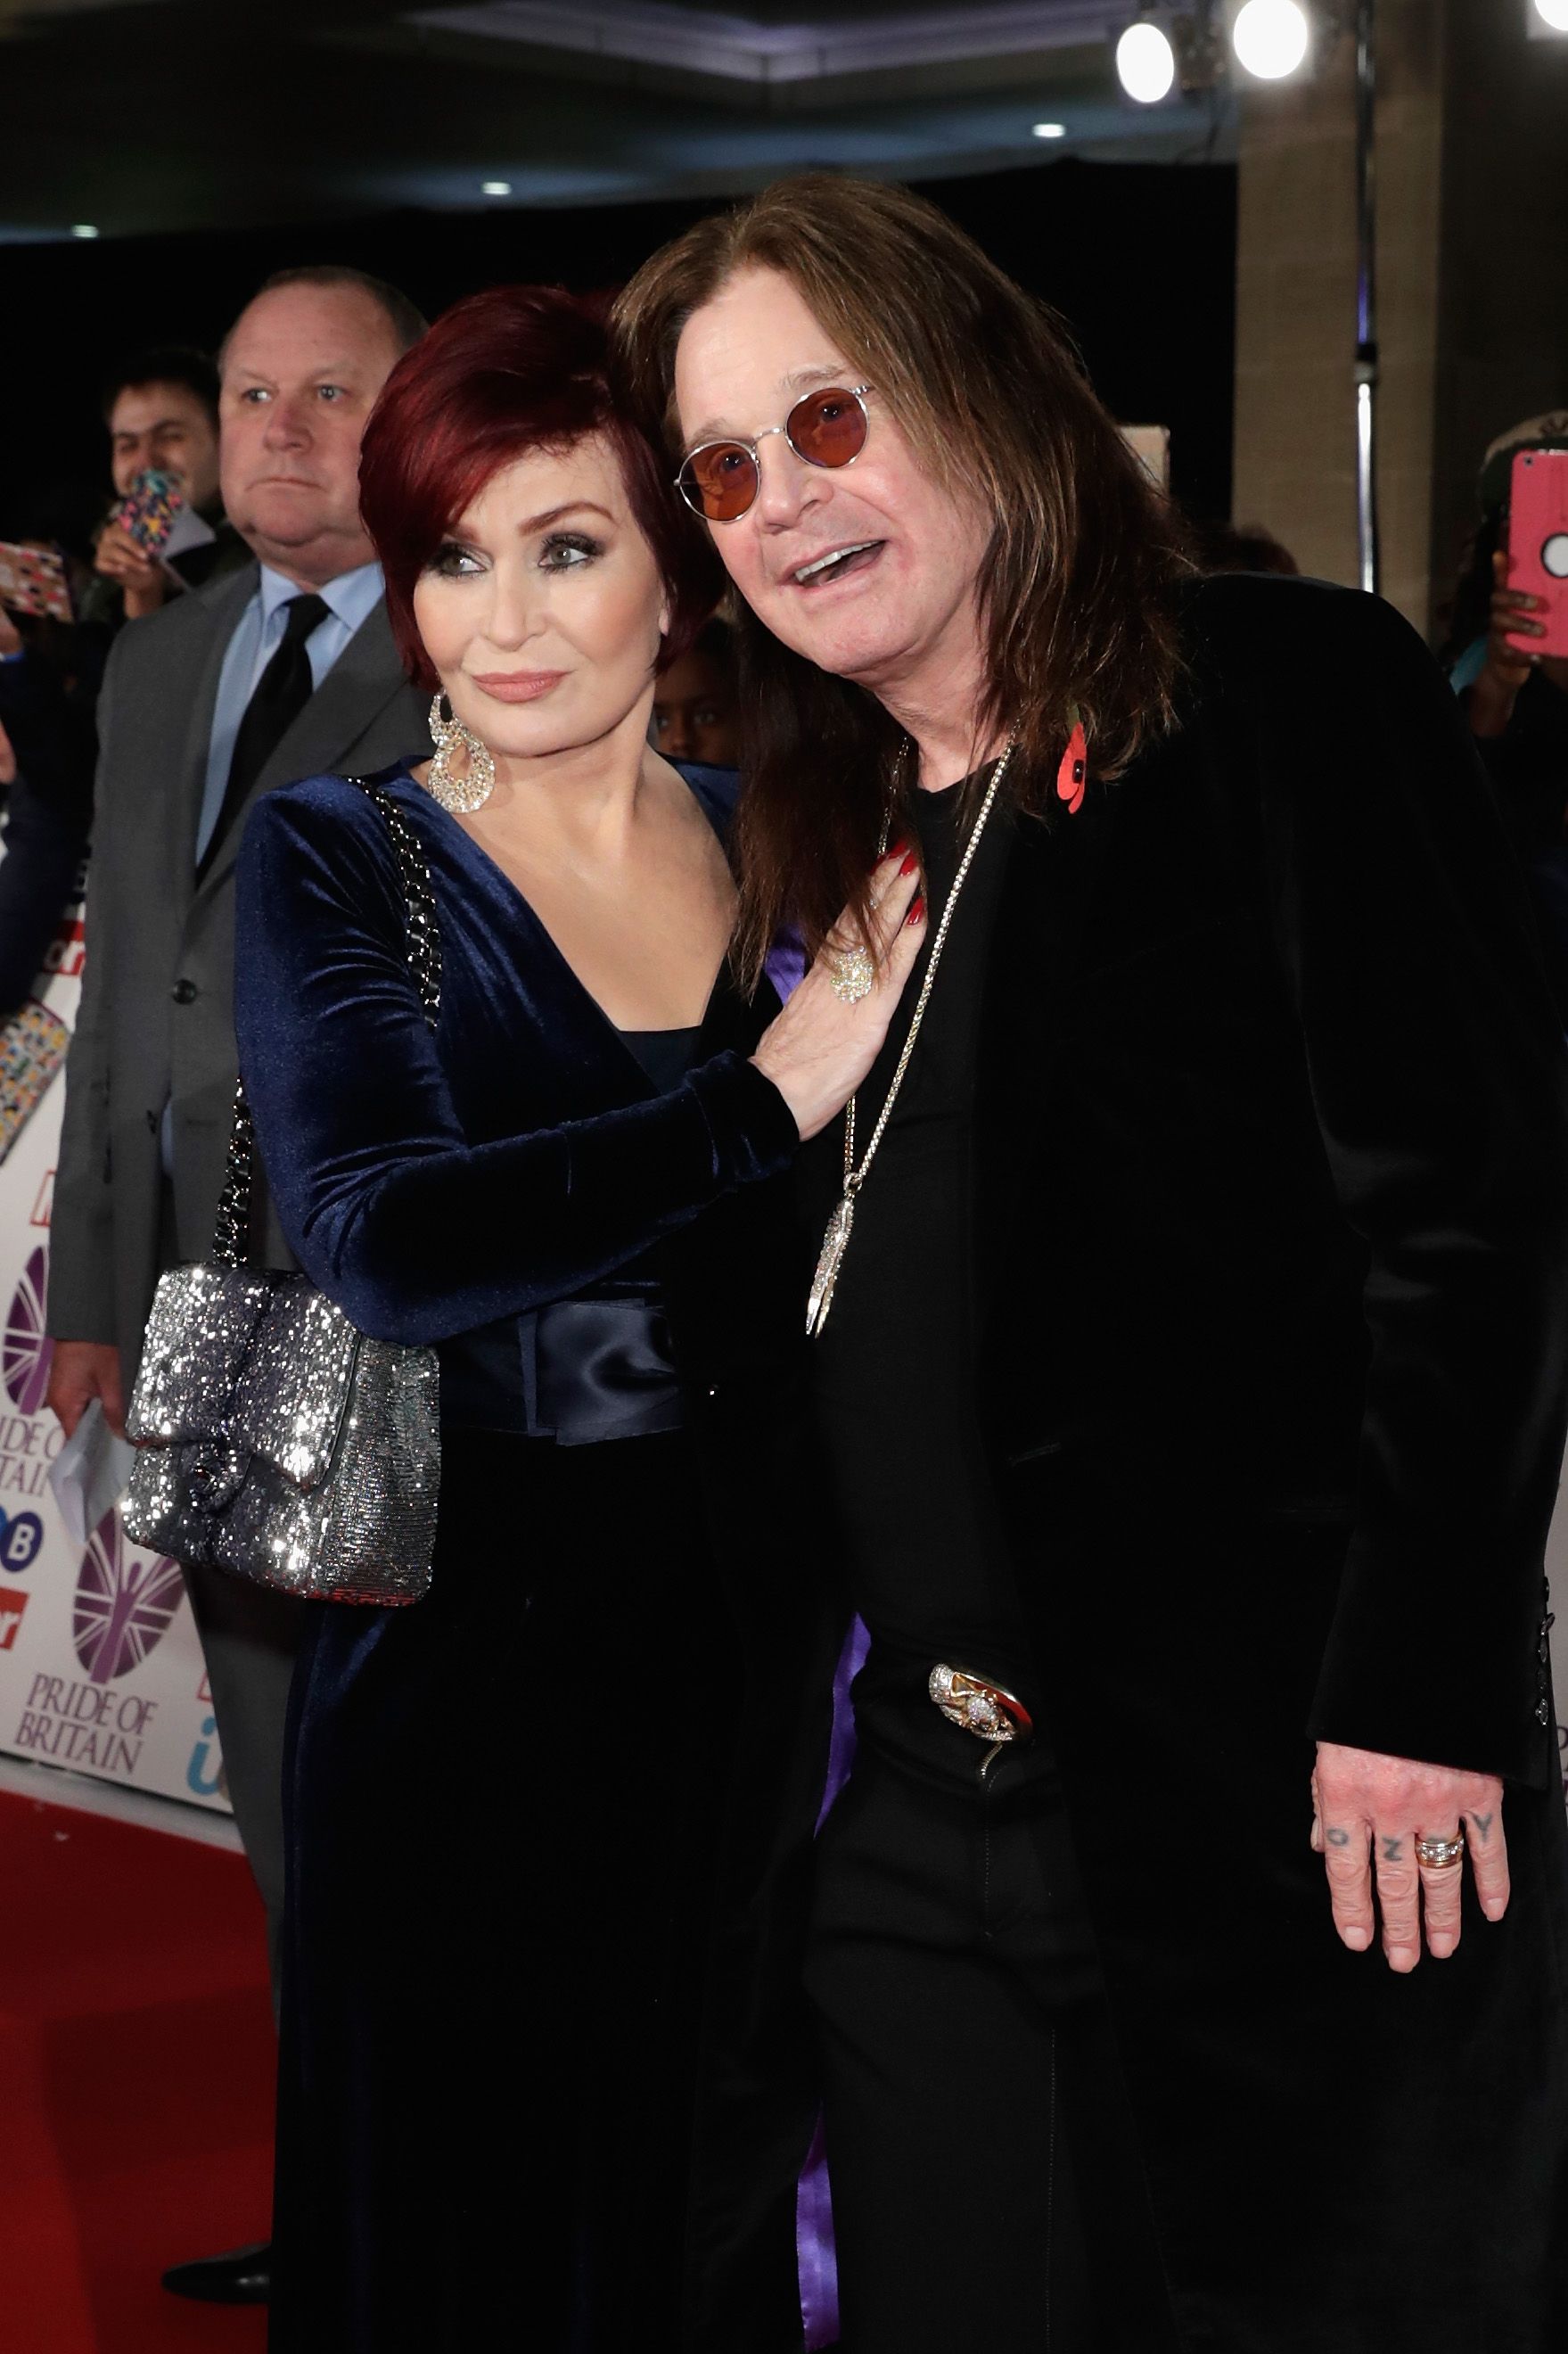 Sharon Osbourne and Ozzy Osbourne at the Pride Of Britain Awards at Grosvenor House in London, England | Photo: John Phillips/Getty Images